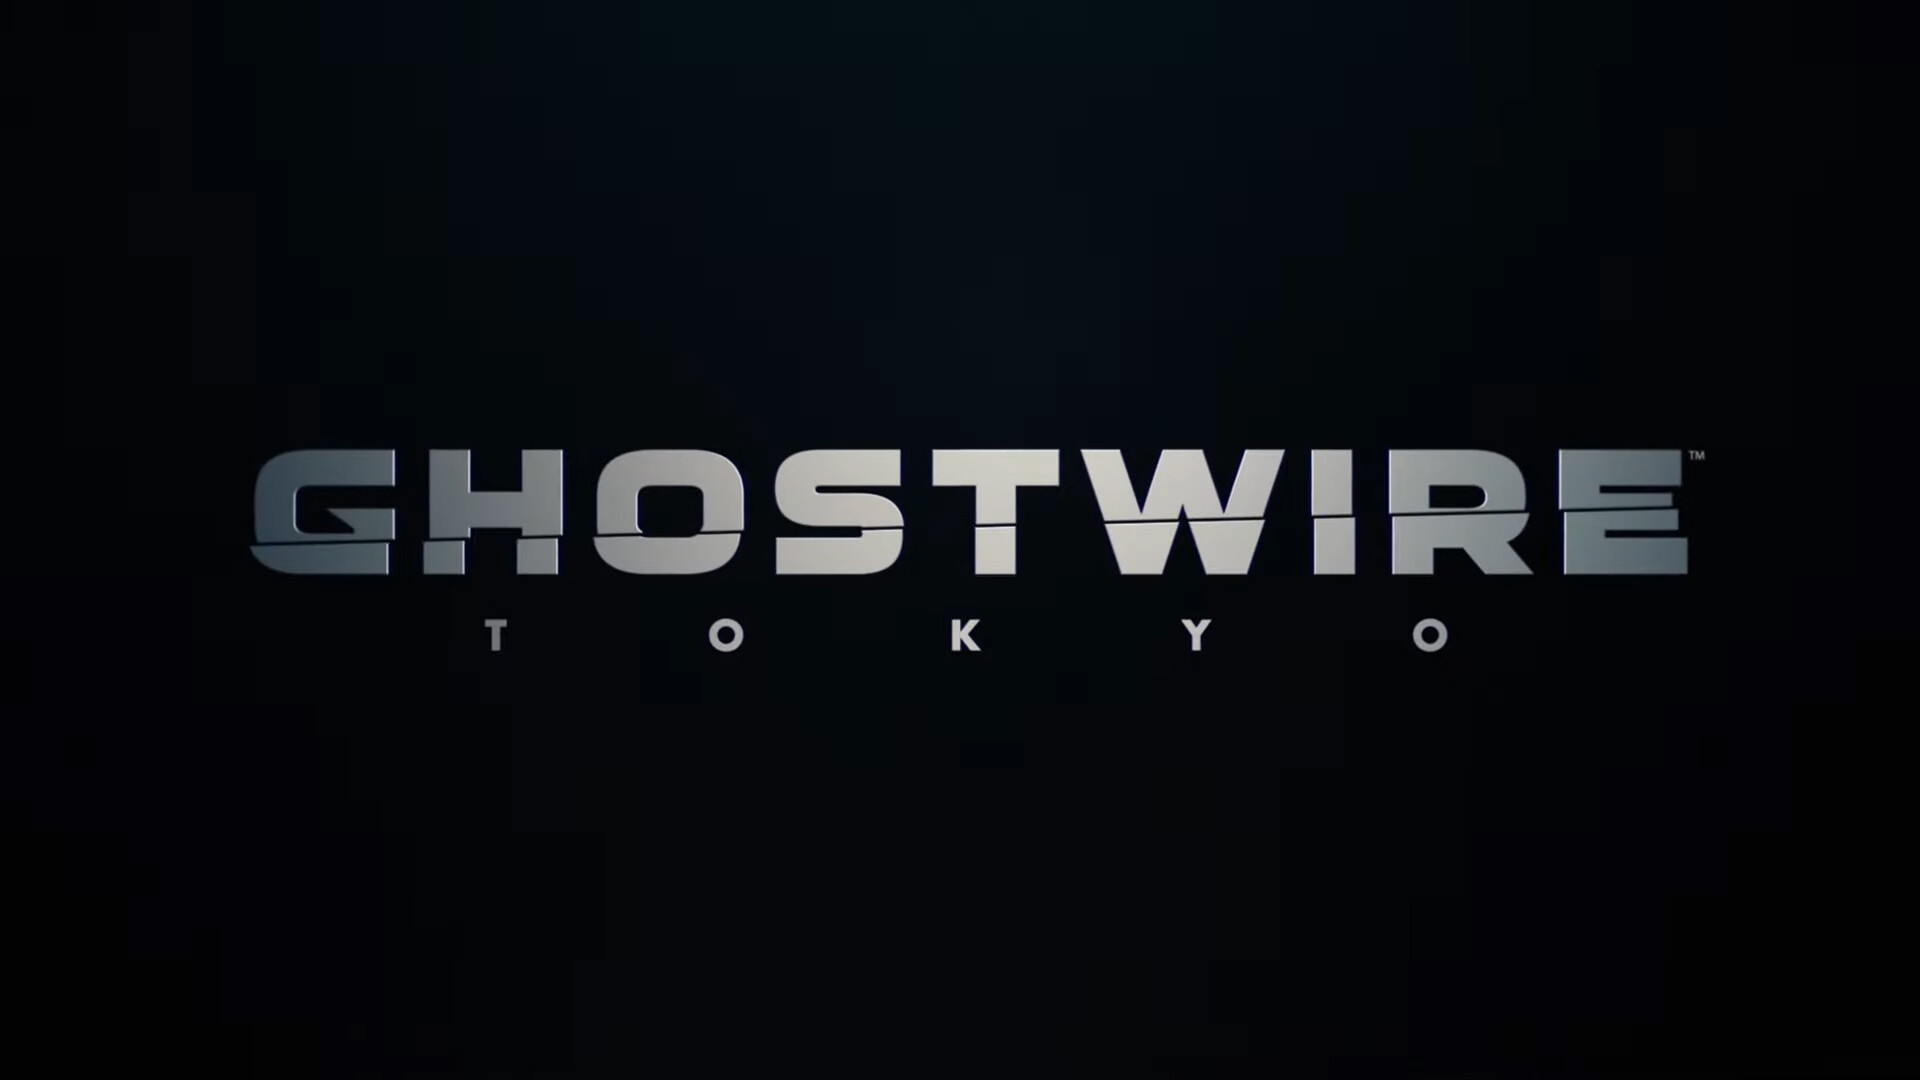 Ghostwire: Tokyo, PlayStation 5 release, Delayed to 2022, Highly anticipated horror title, 1920x1080 Full HD Desktop